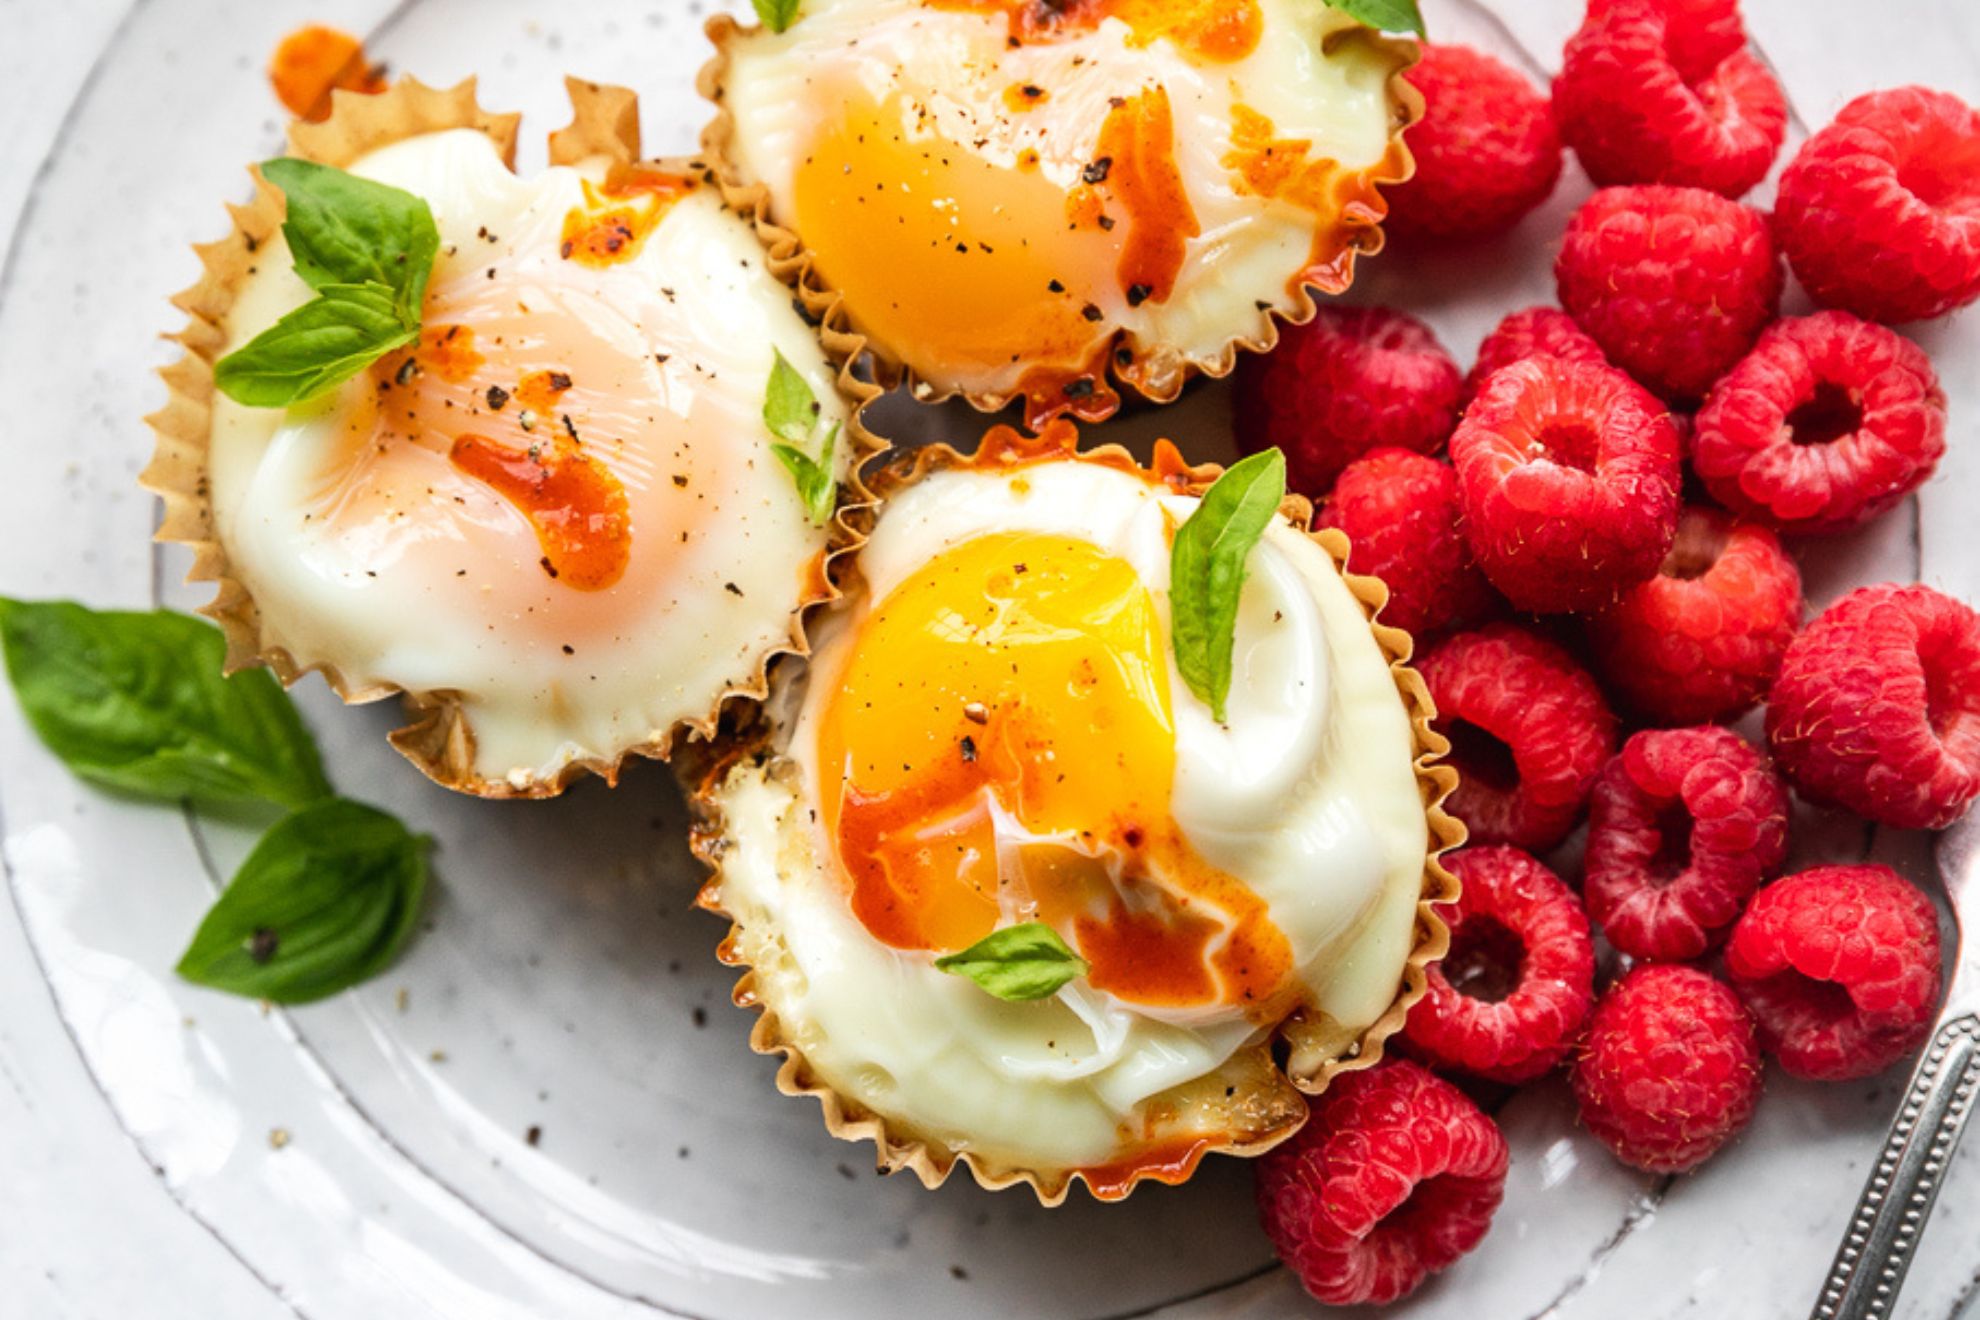 This is a horizontal overhead image looking closeup at a white plate with three egg bites. The egg bites are lined with muffin liners and topped with drips of hot sauce and basil leaves on top and around the cups. A couple handfuls of raspberries are to the right of the egg cups. A knife is leaning on the side of the white plate at an angle with the blade cut off on the right side of the image.